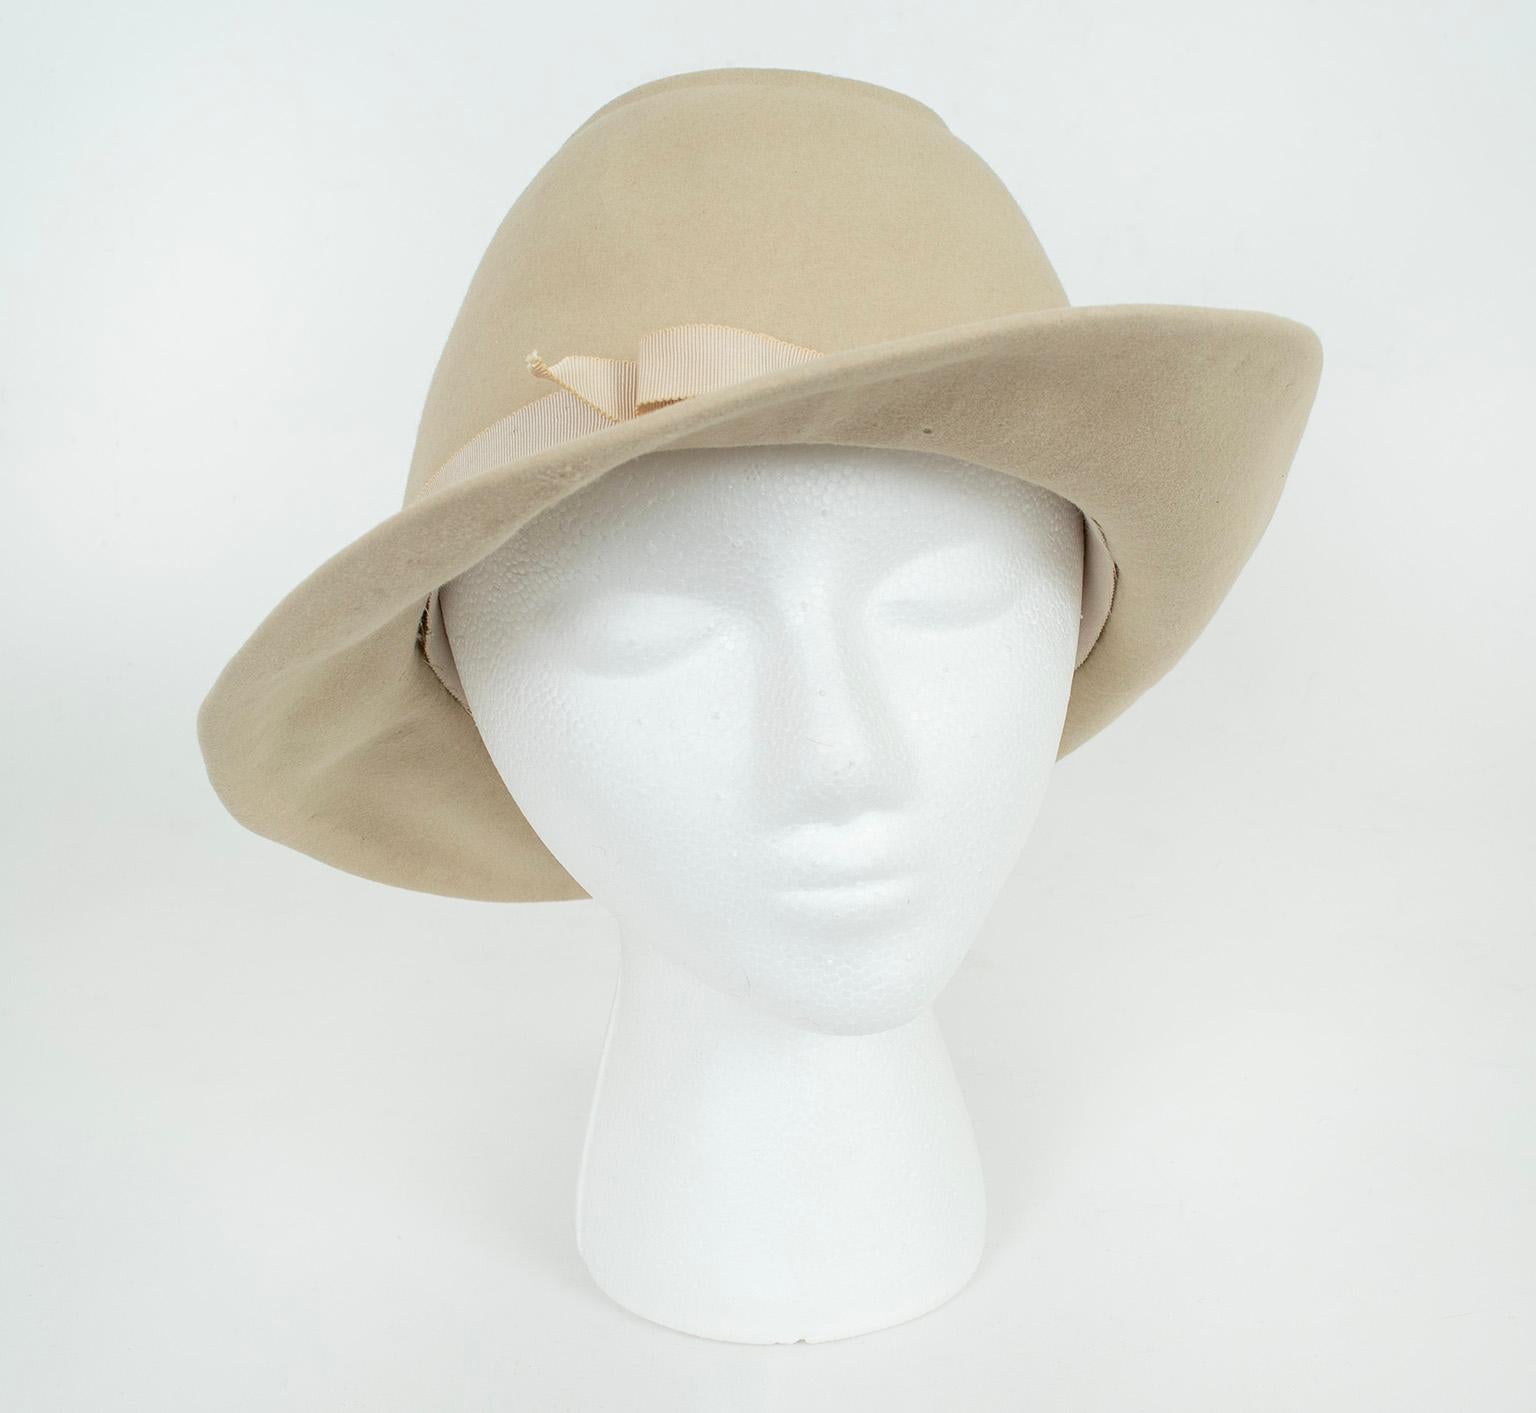 A feminine take on a menswear classic, this unstructured fedora is completely pliable so it can be bent in a multitude of ways and still maintain its shape. Its narrower brim and slim grosgrain band are perfectly proportioned for a woman’s face